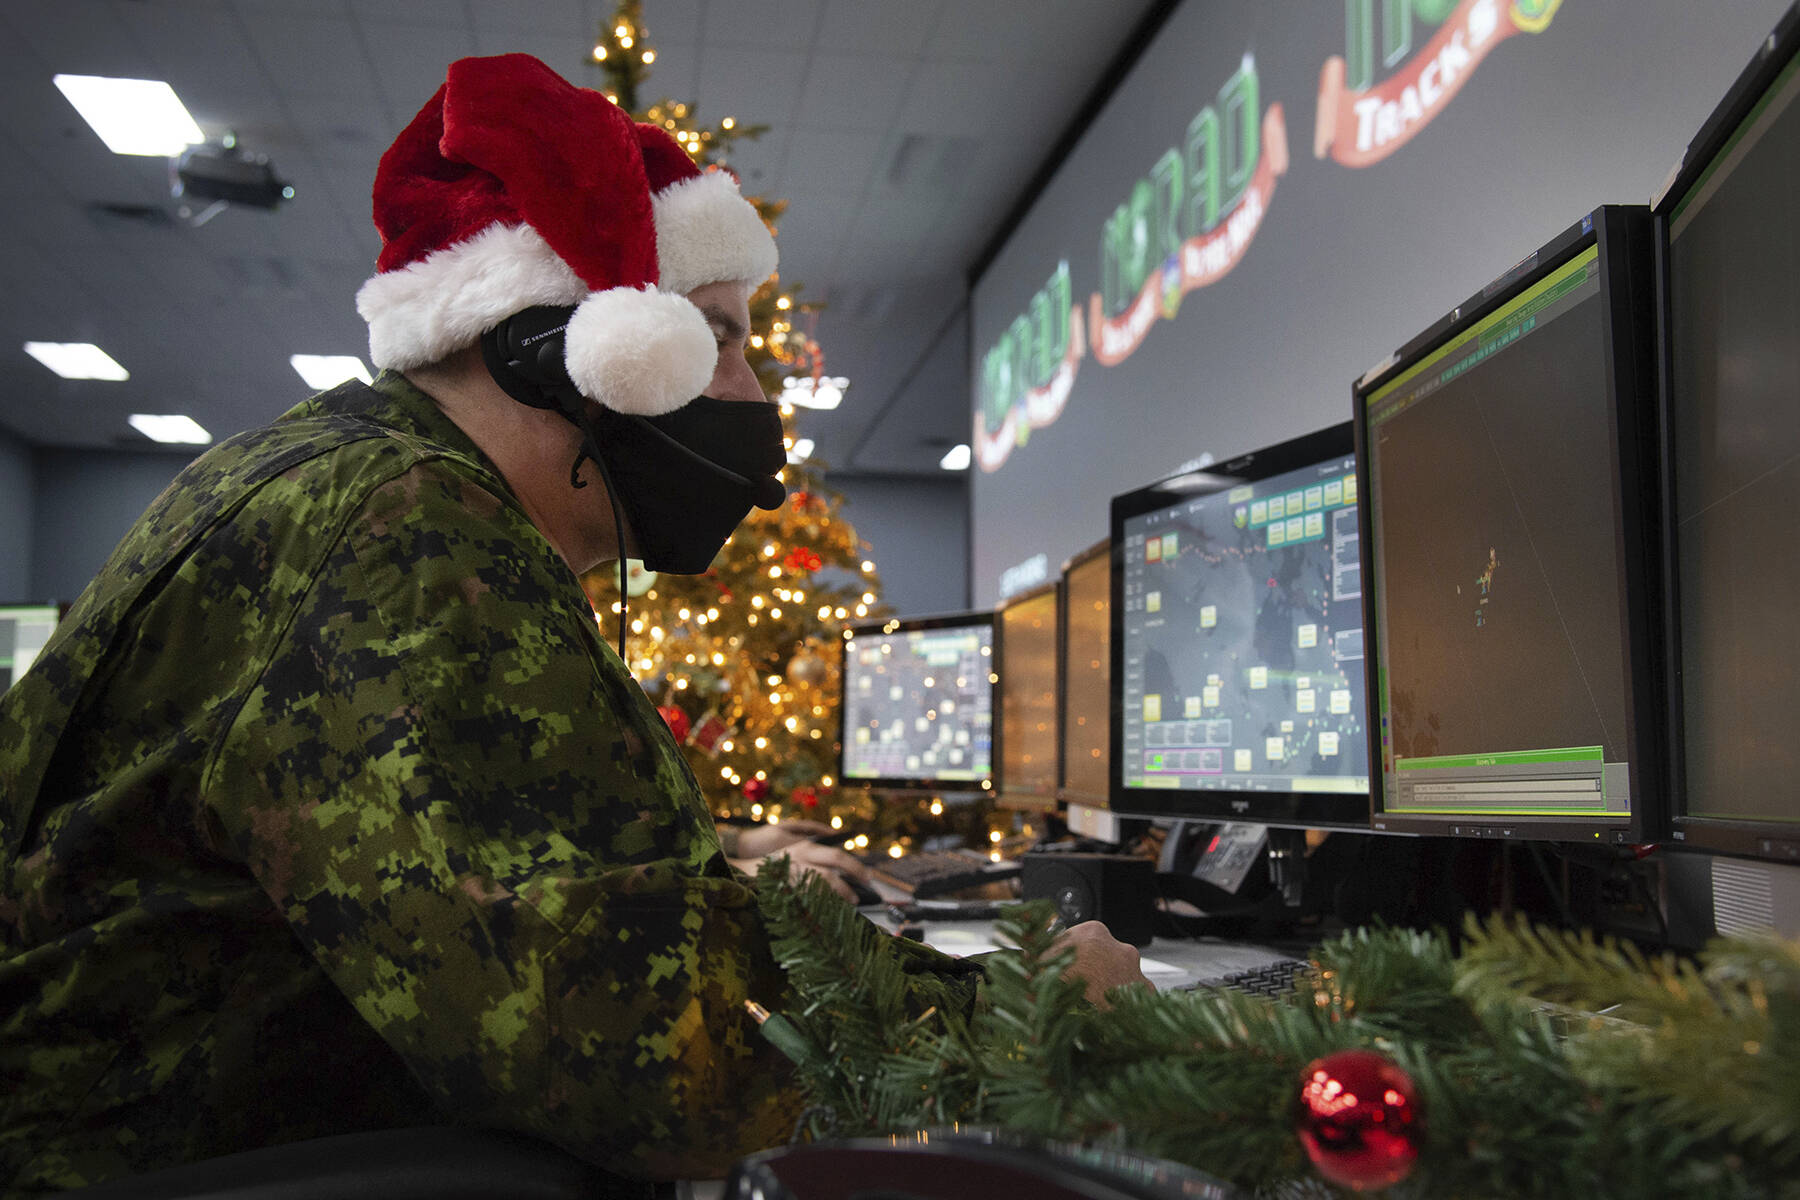 In this photo provided by the North American Aerospace Defense Command, a 22 Wing member is seen showing how they track Santa on his sleigh on Christmas evening during a media preview at the Canadian Forces Base in North Bay on Dec. 9, 2021. In a Christmas Eve tradition going on its 66th year, a wildly popular program run by the U.S. and Canadian militaries is providing real-time updates on Santa’s progress around the globe — and fielding calls from children who want to know St. Nick’s exact whereabouts. (Sable Brown / NORAD)